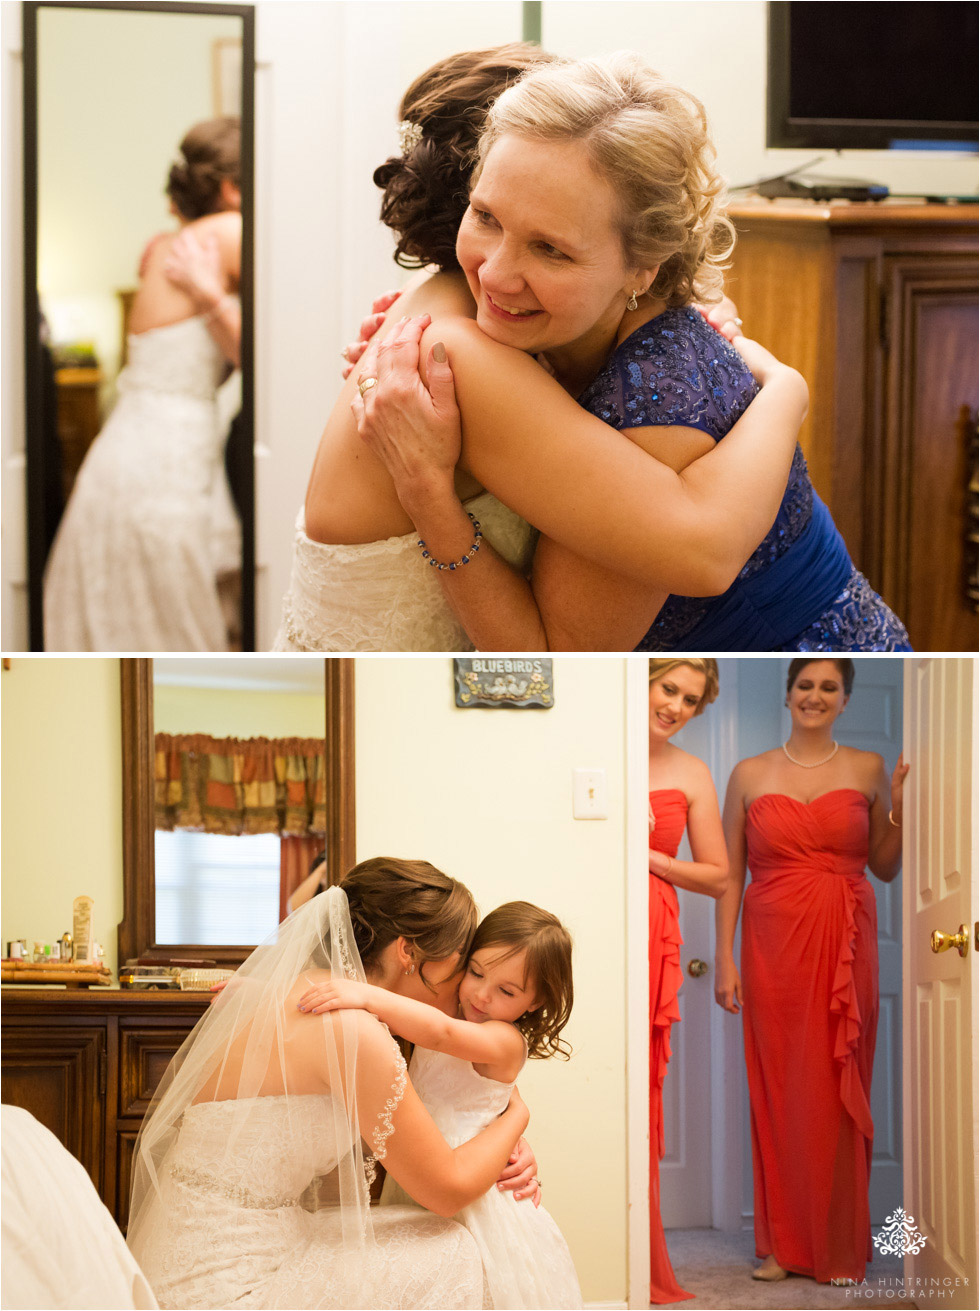 Bride getting ready at her parents home in New Jersey, Pennsylvania - Blog of Nina Hintringer Photography - Wedding Photography, Wedding Reportage and Destination Weddings